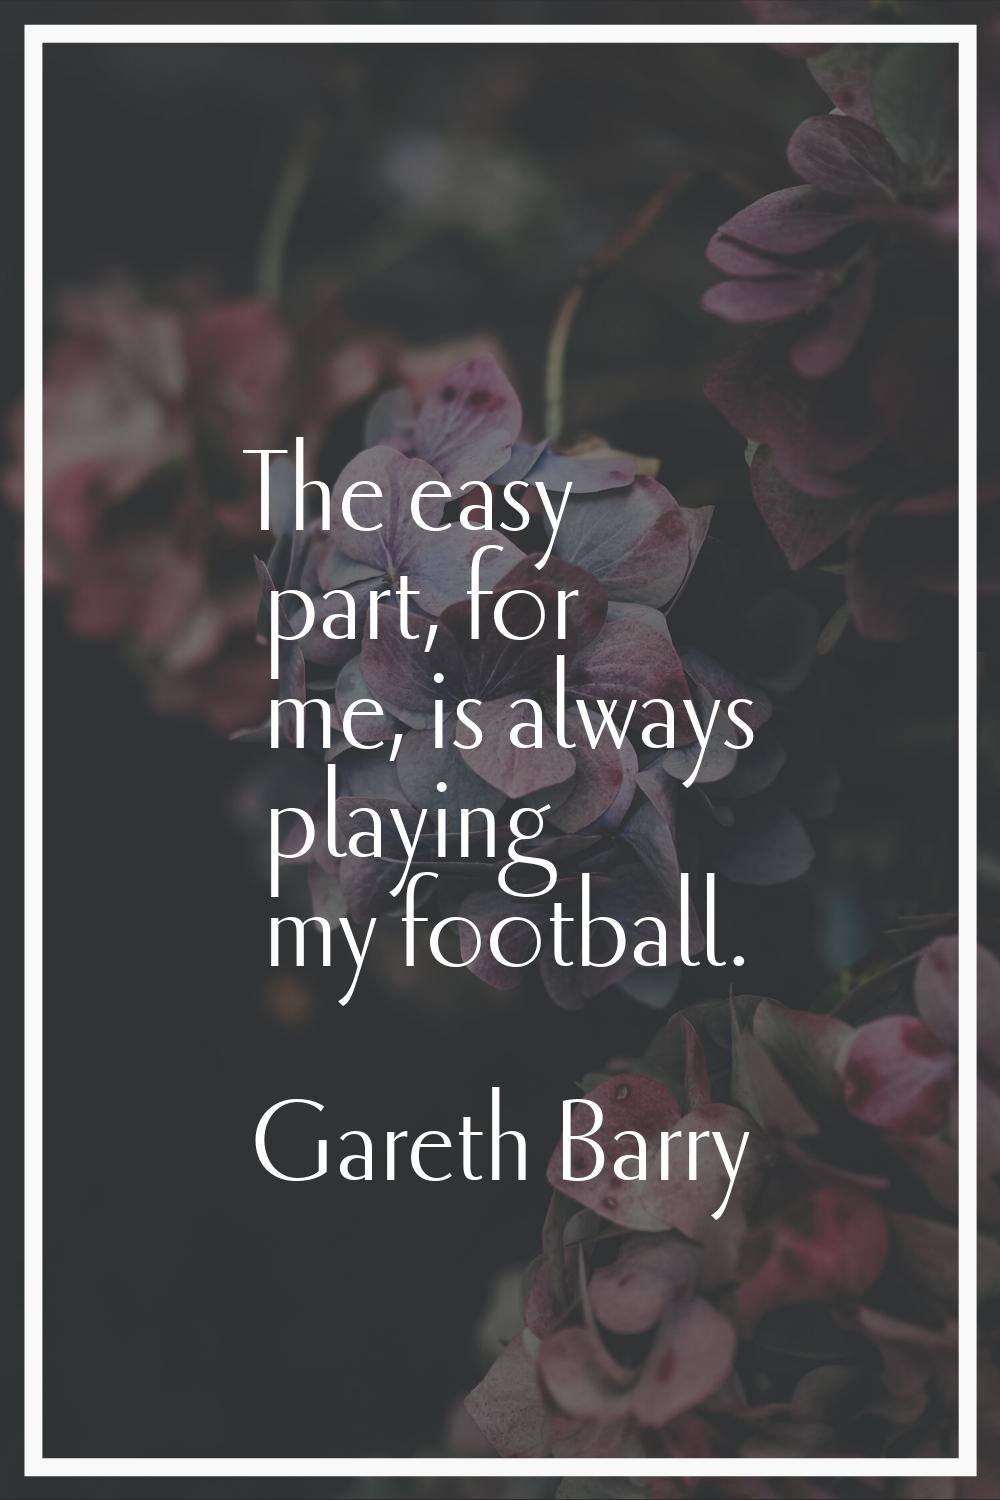 The easy part, for me, is always playing my football.